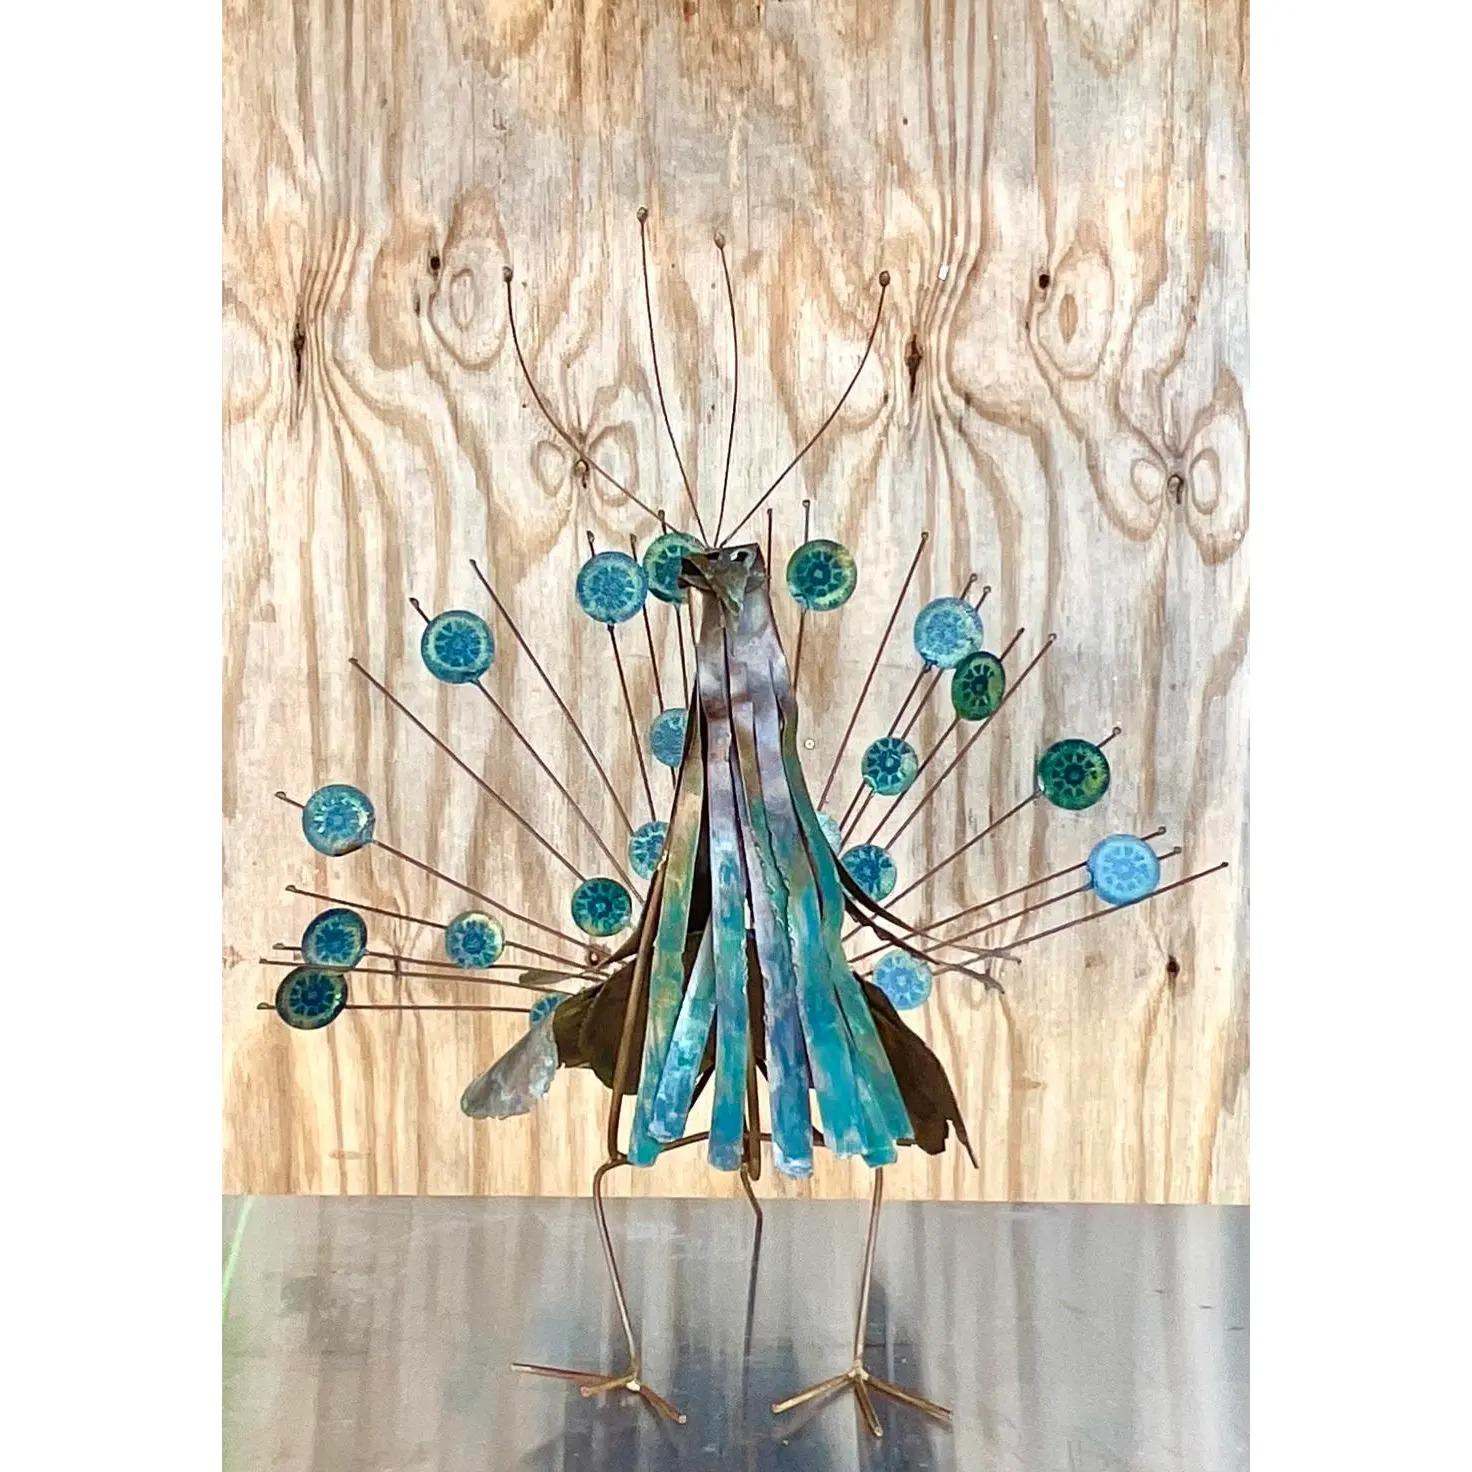 Stunning vintage midcentury Peacock sculpture. Large and impressive with a beautiful patina from time. Hand made Brutalist design with hand painted feathers. Acquired from a Palm Beach estate.